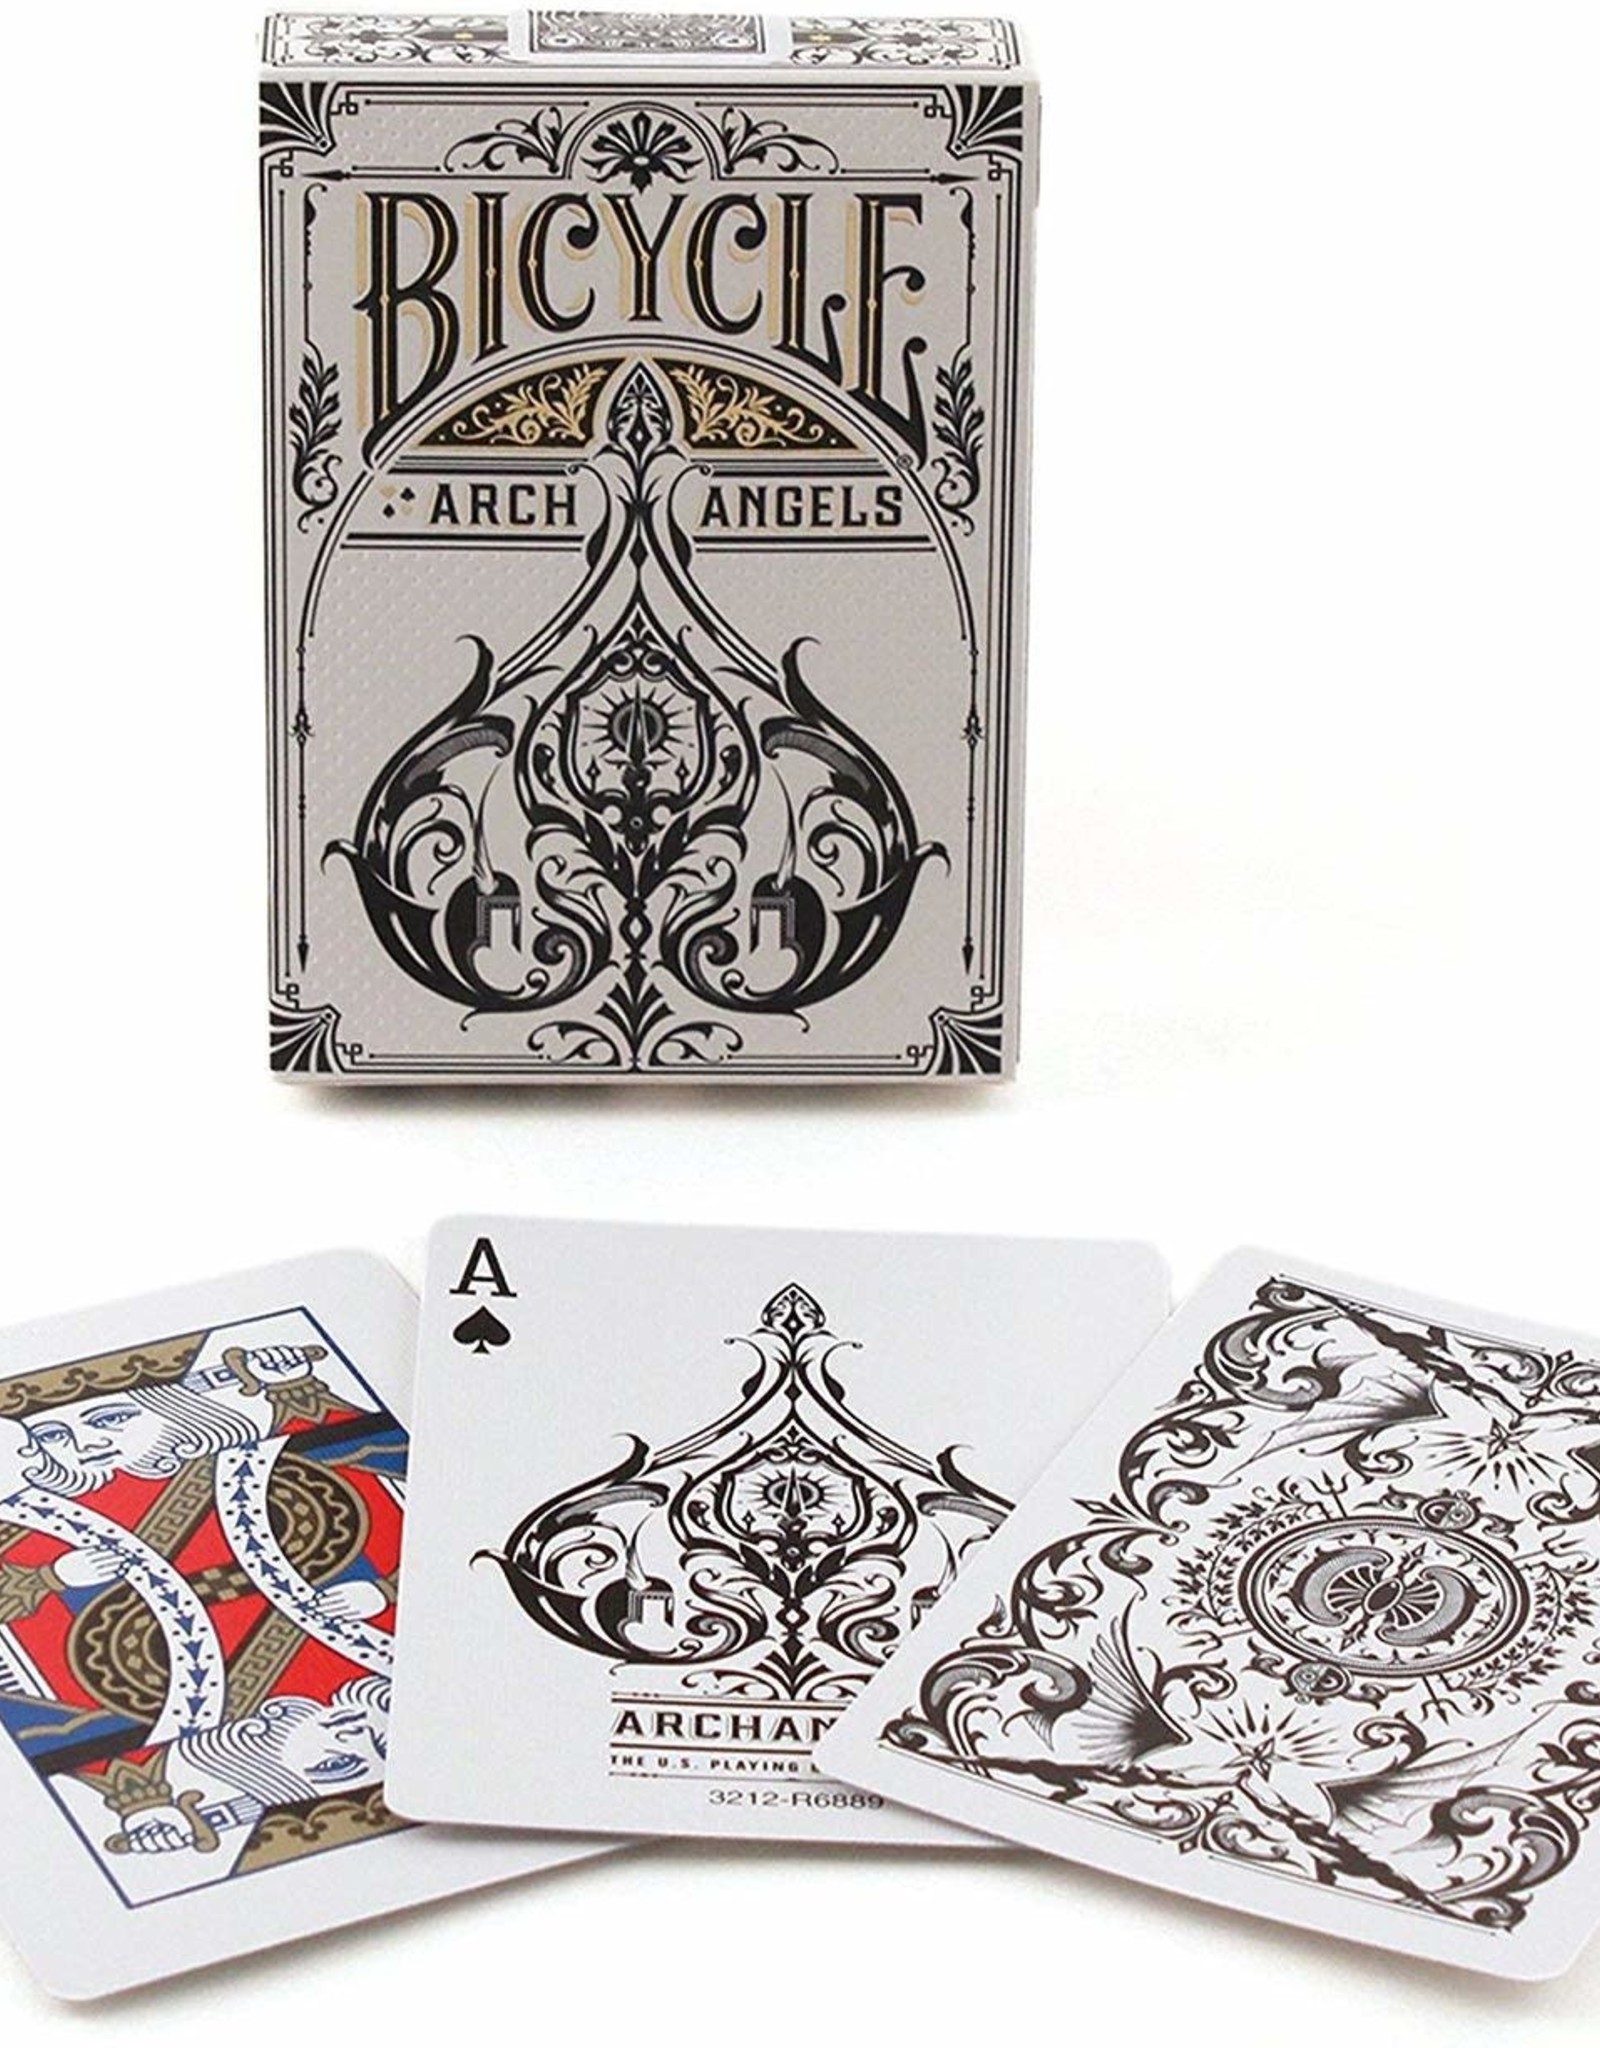 Bicycle Playing Cards: Archangels